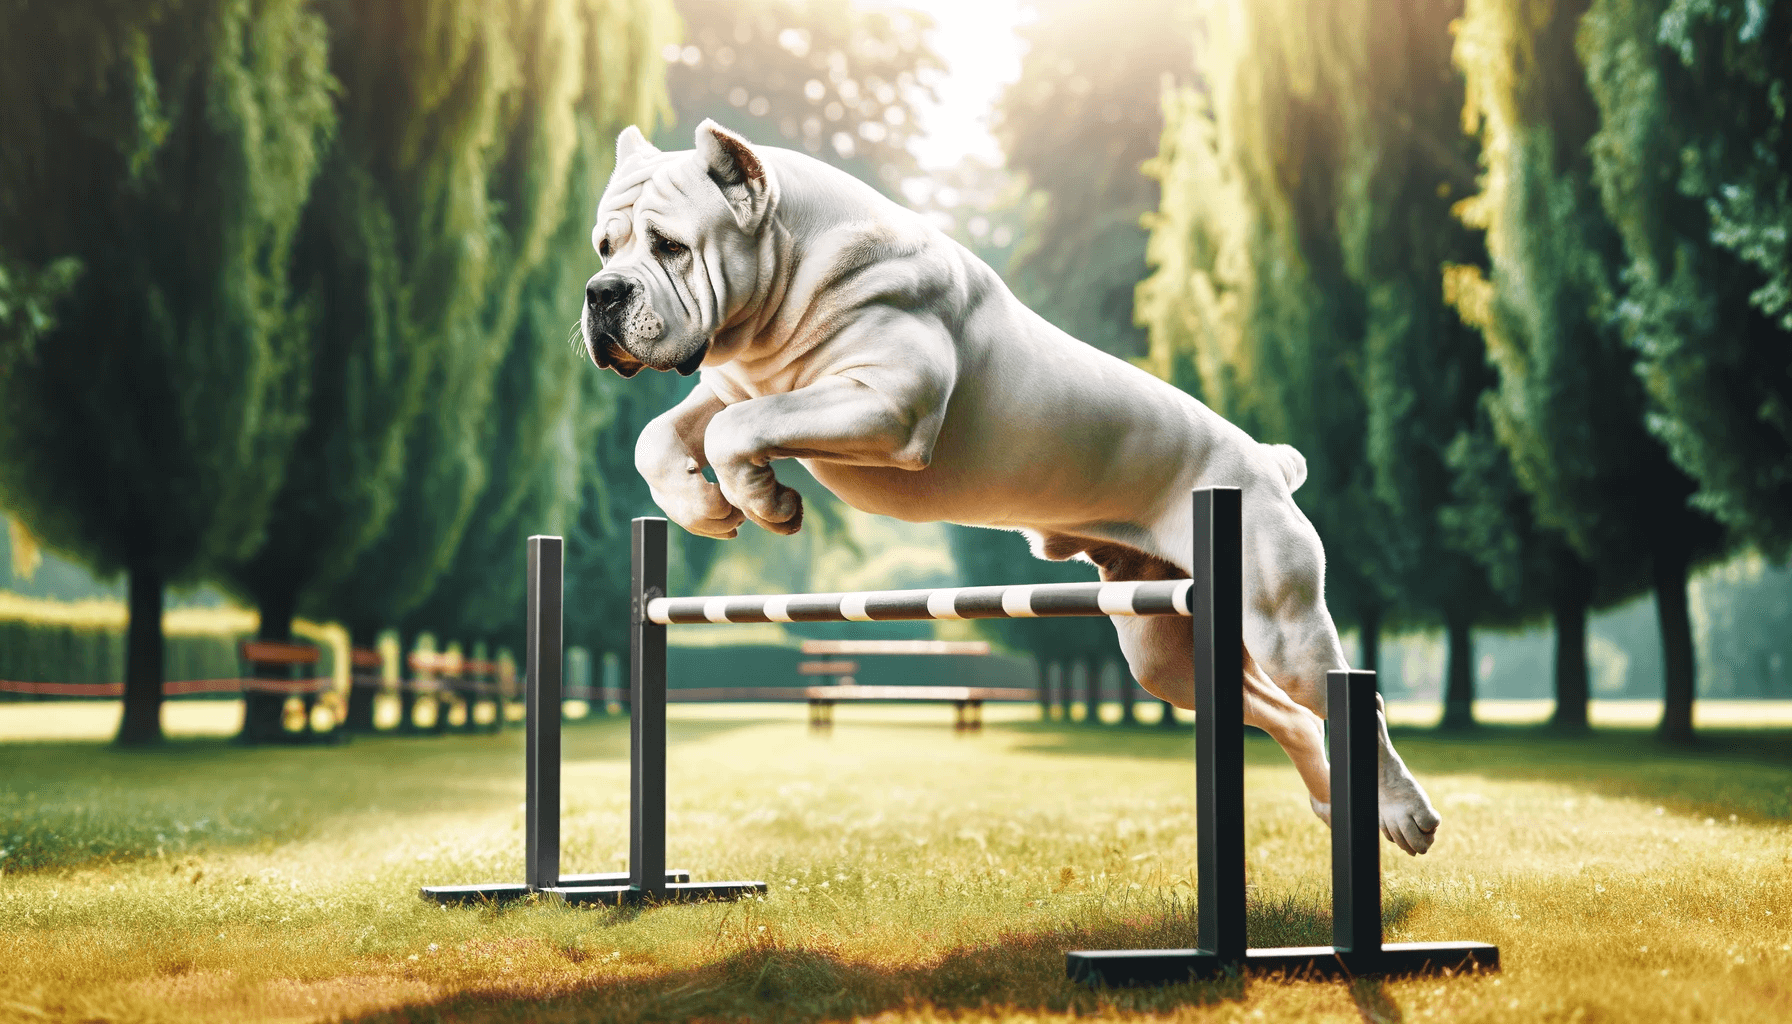 A White Cane Corso engaged in training or exercise, leaping over a hurdle in a park.